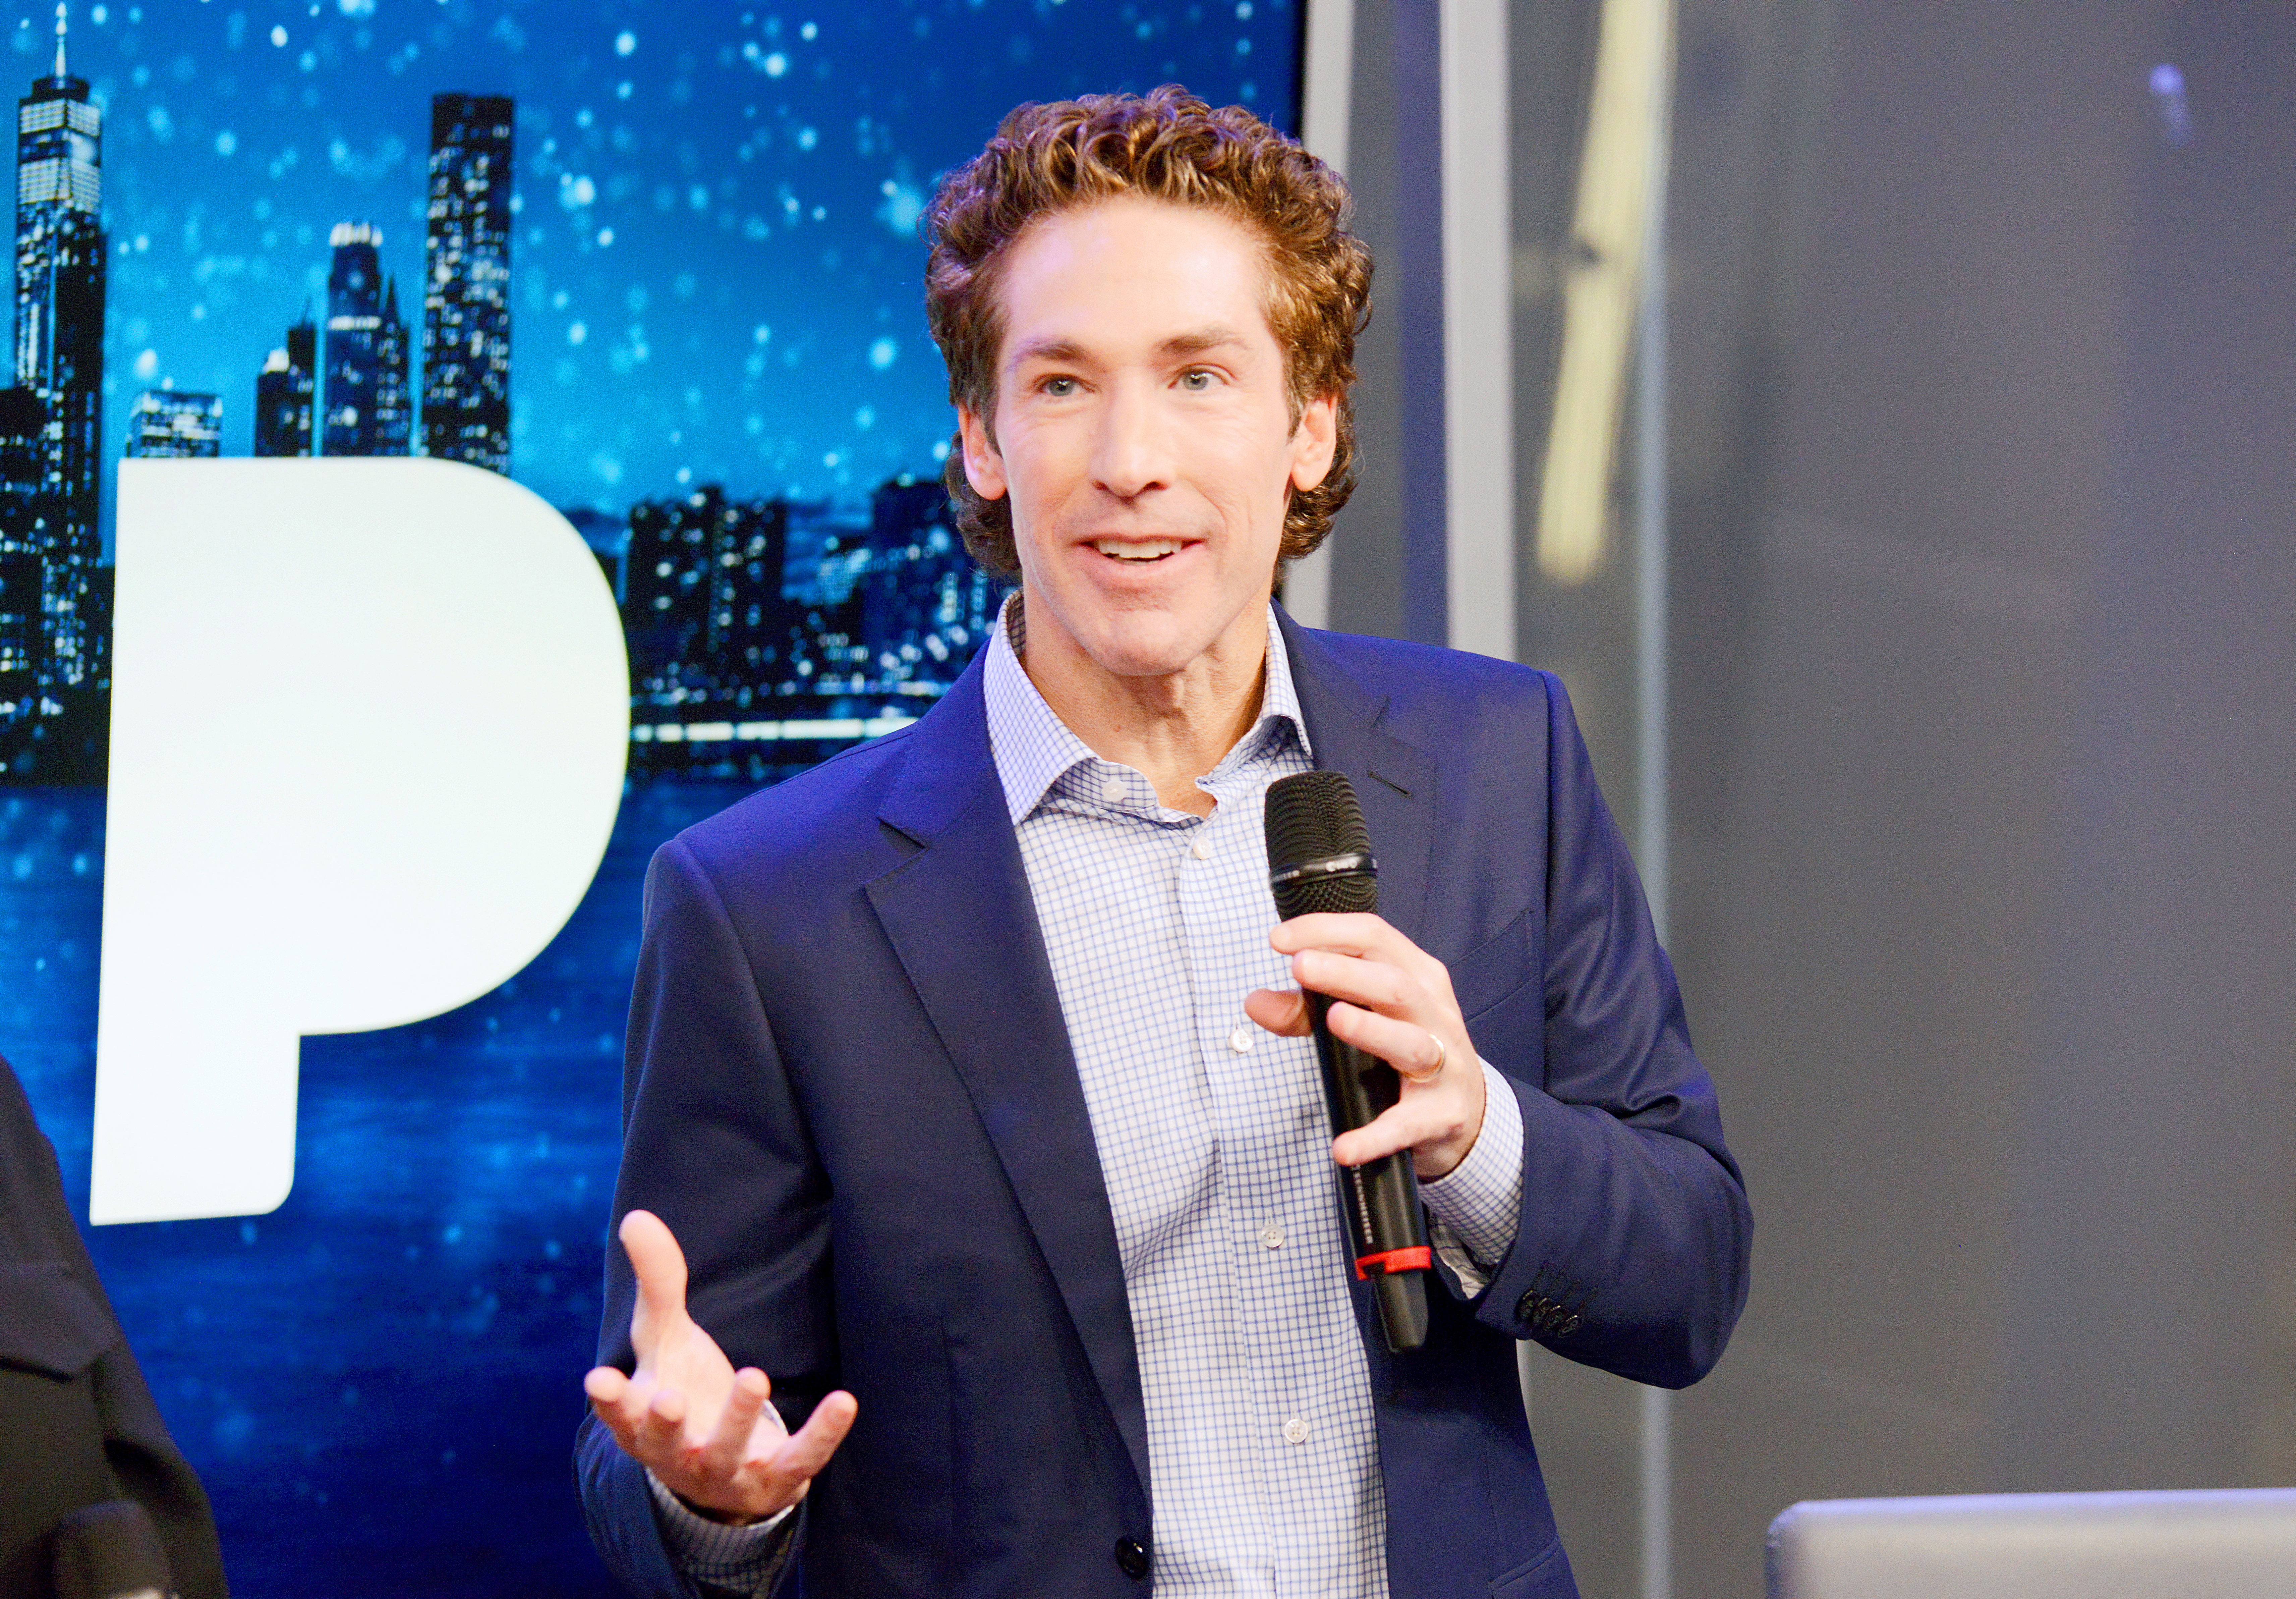 Plumber Finds Cash Tied To Burglary Behind Walls Of Joel Osteen’s Church